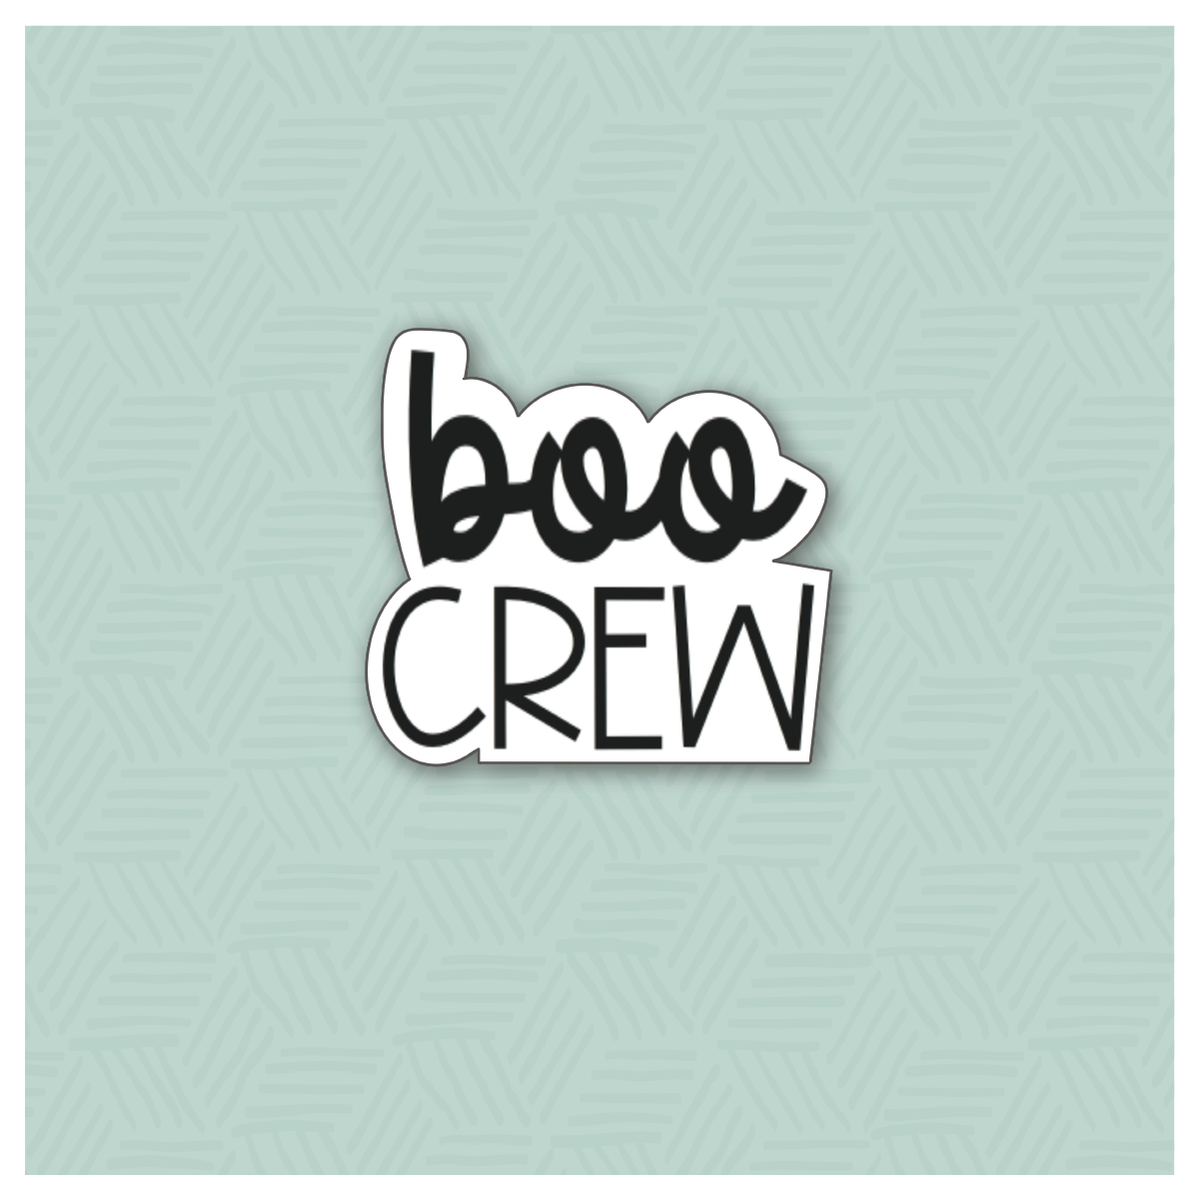 Boo Crew Hand Lettered Cookie Cutter